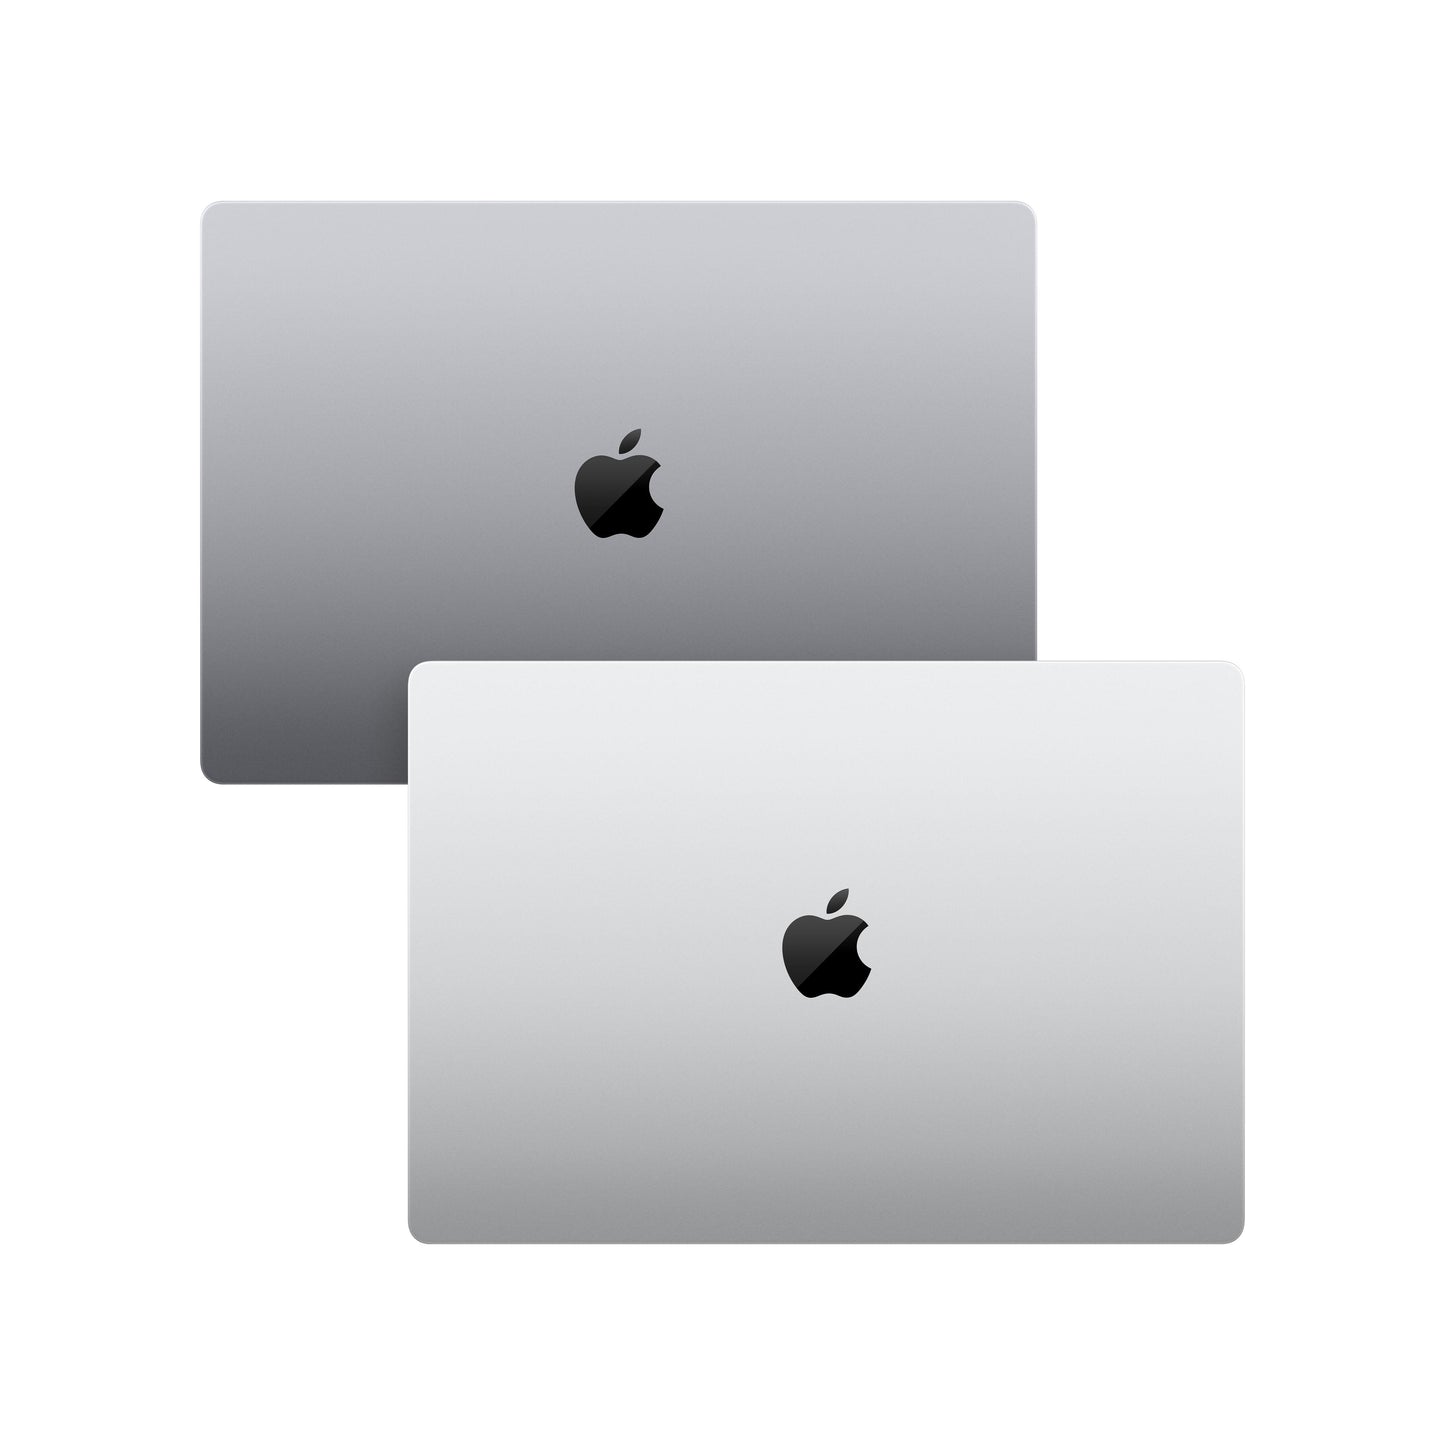 16-inch MacBook Pro: Apple M1 Max chip with 10_core CPU and 32_core GPU, 1TB SSD - Space Grey